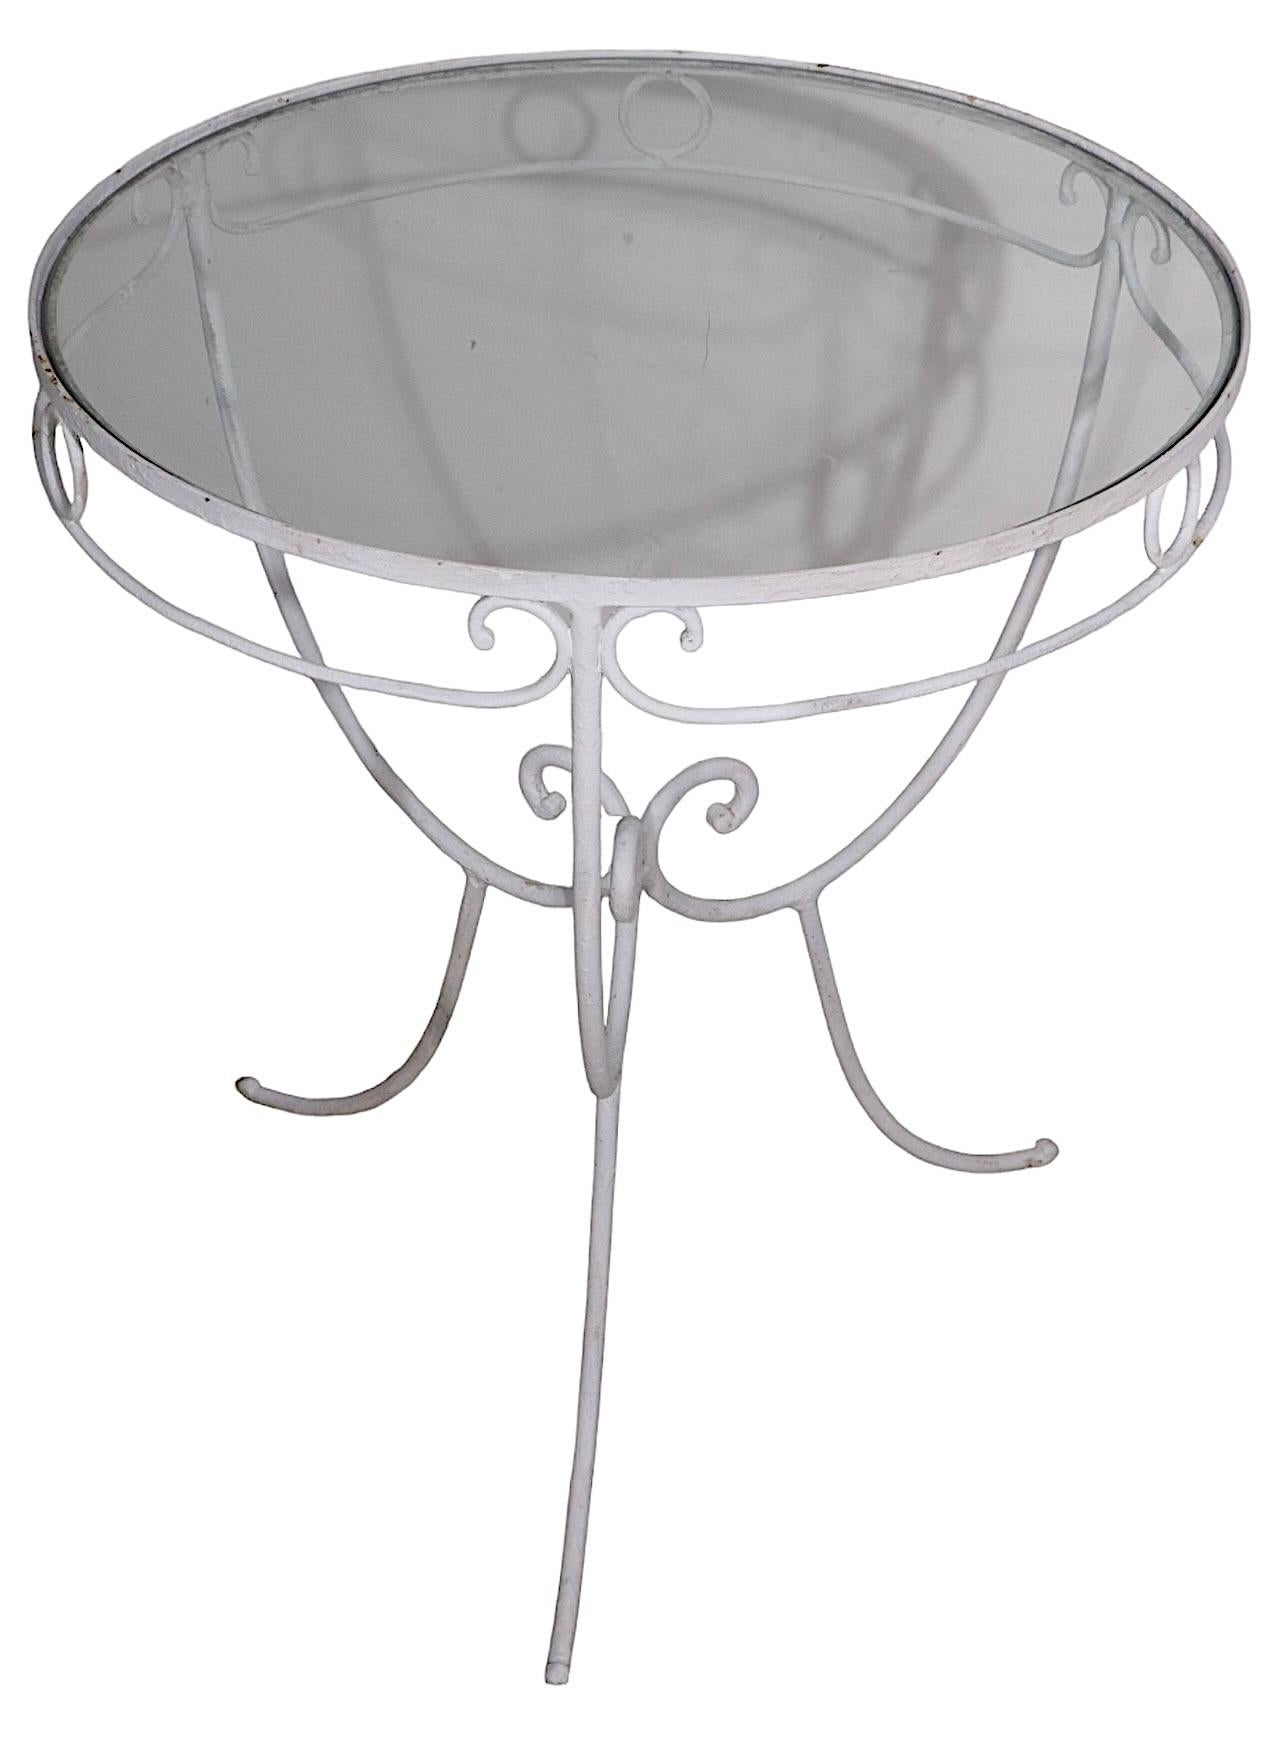 American Wrought Iron and Glass Garden Patio Poolside Side Table Att. to Salterini